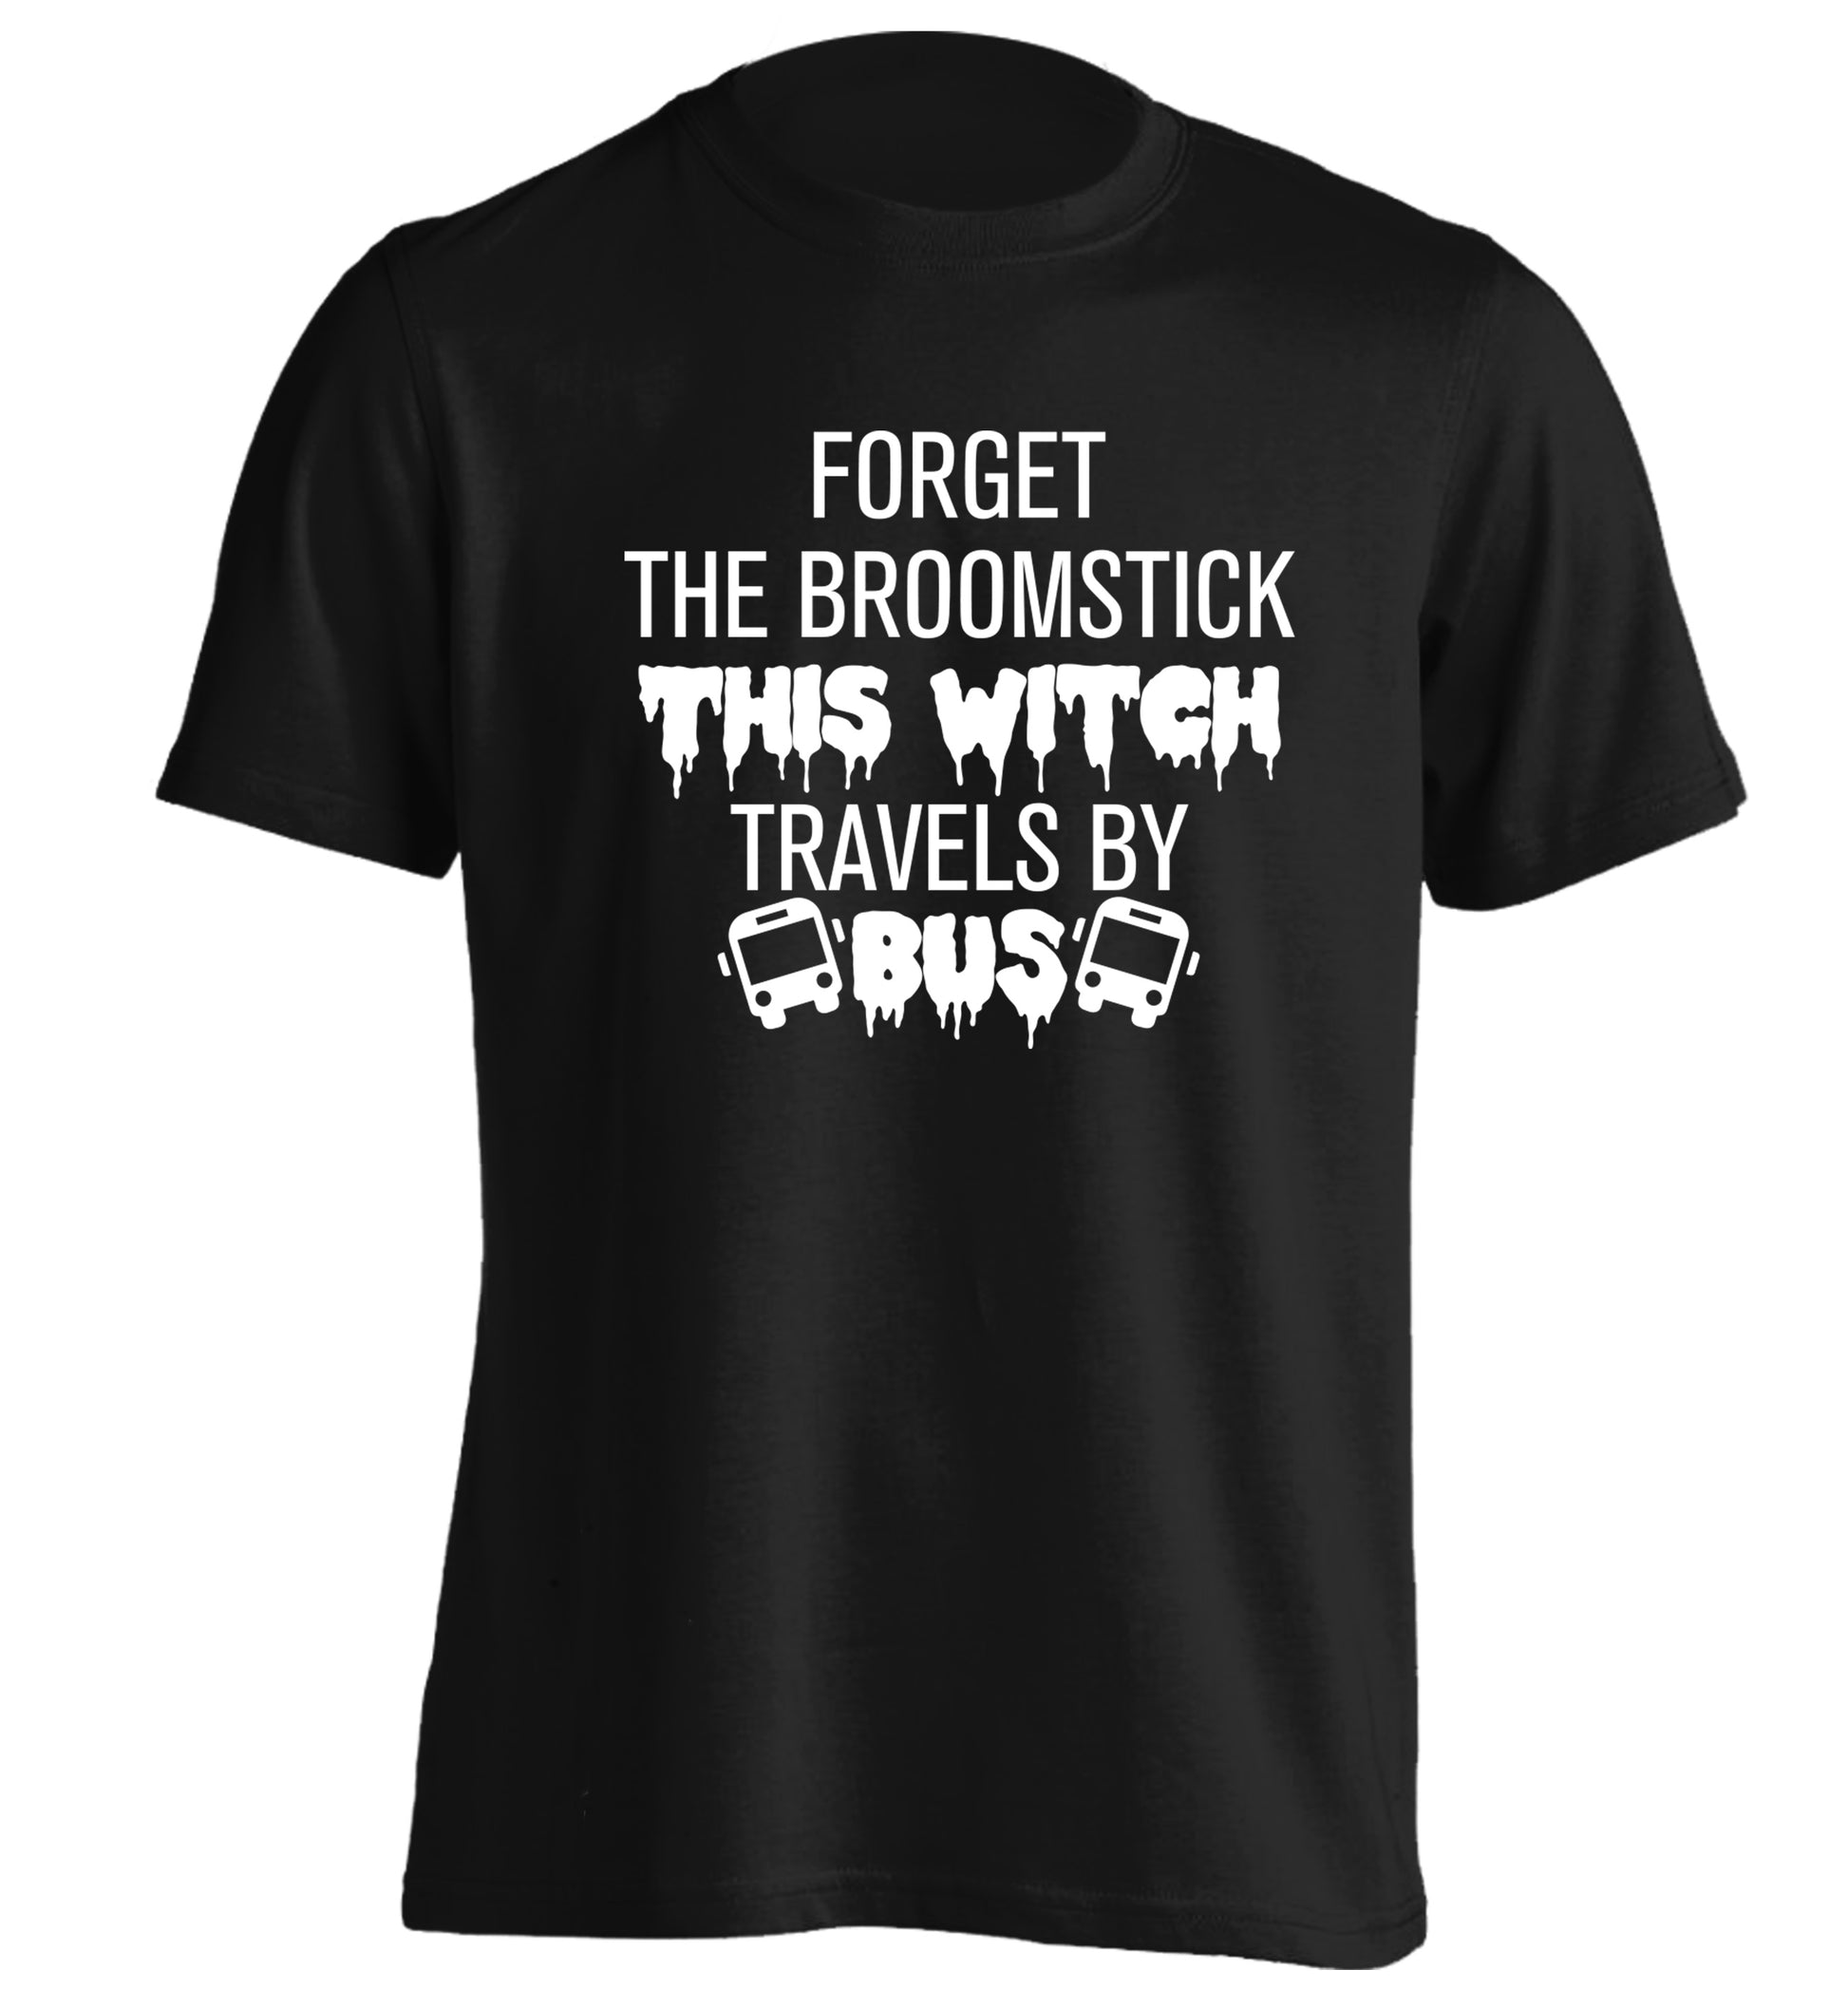 Forget the broomstick this witch travels by bus adults unisexblack Tshirt 2XL